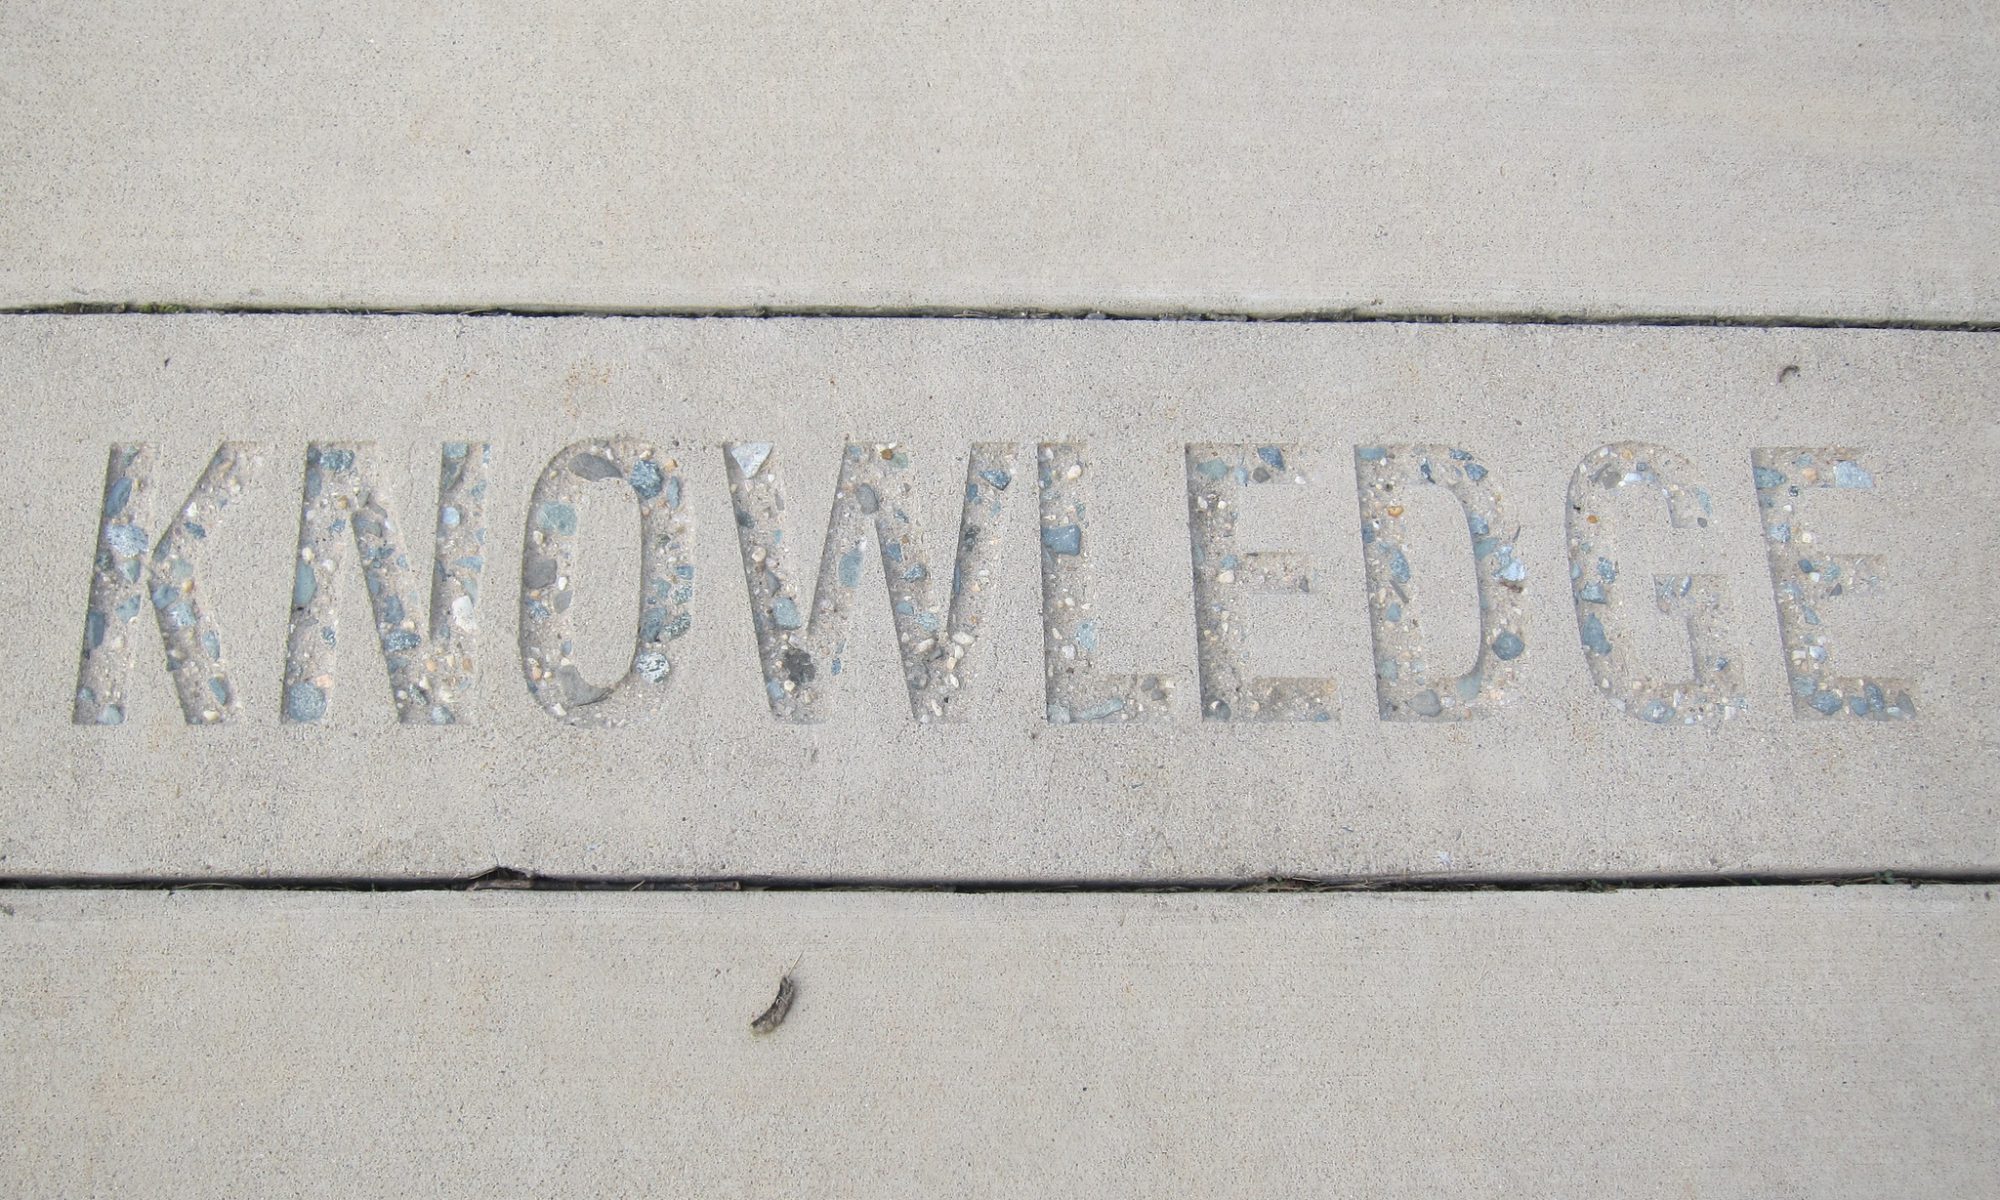 A photograph of the word "knowledge engraved in white sandstone